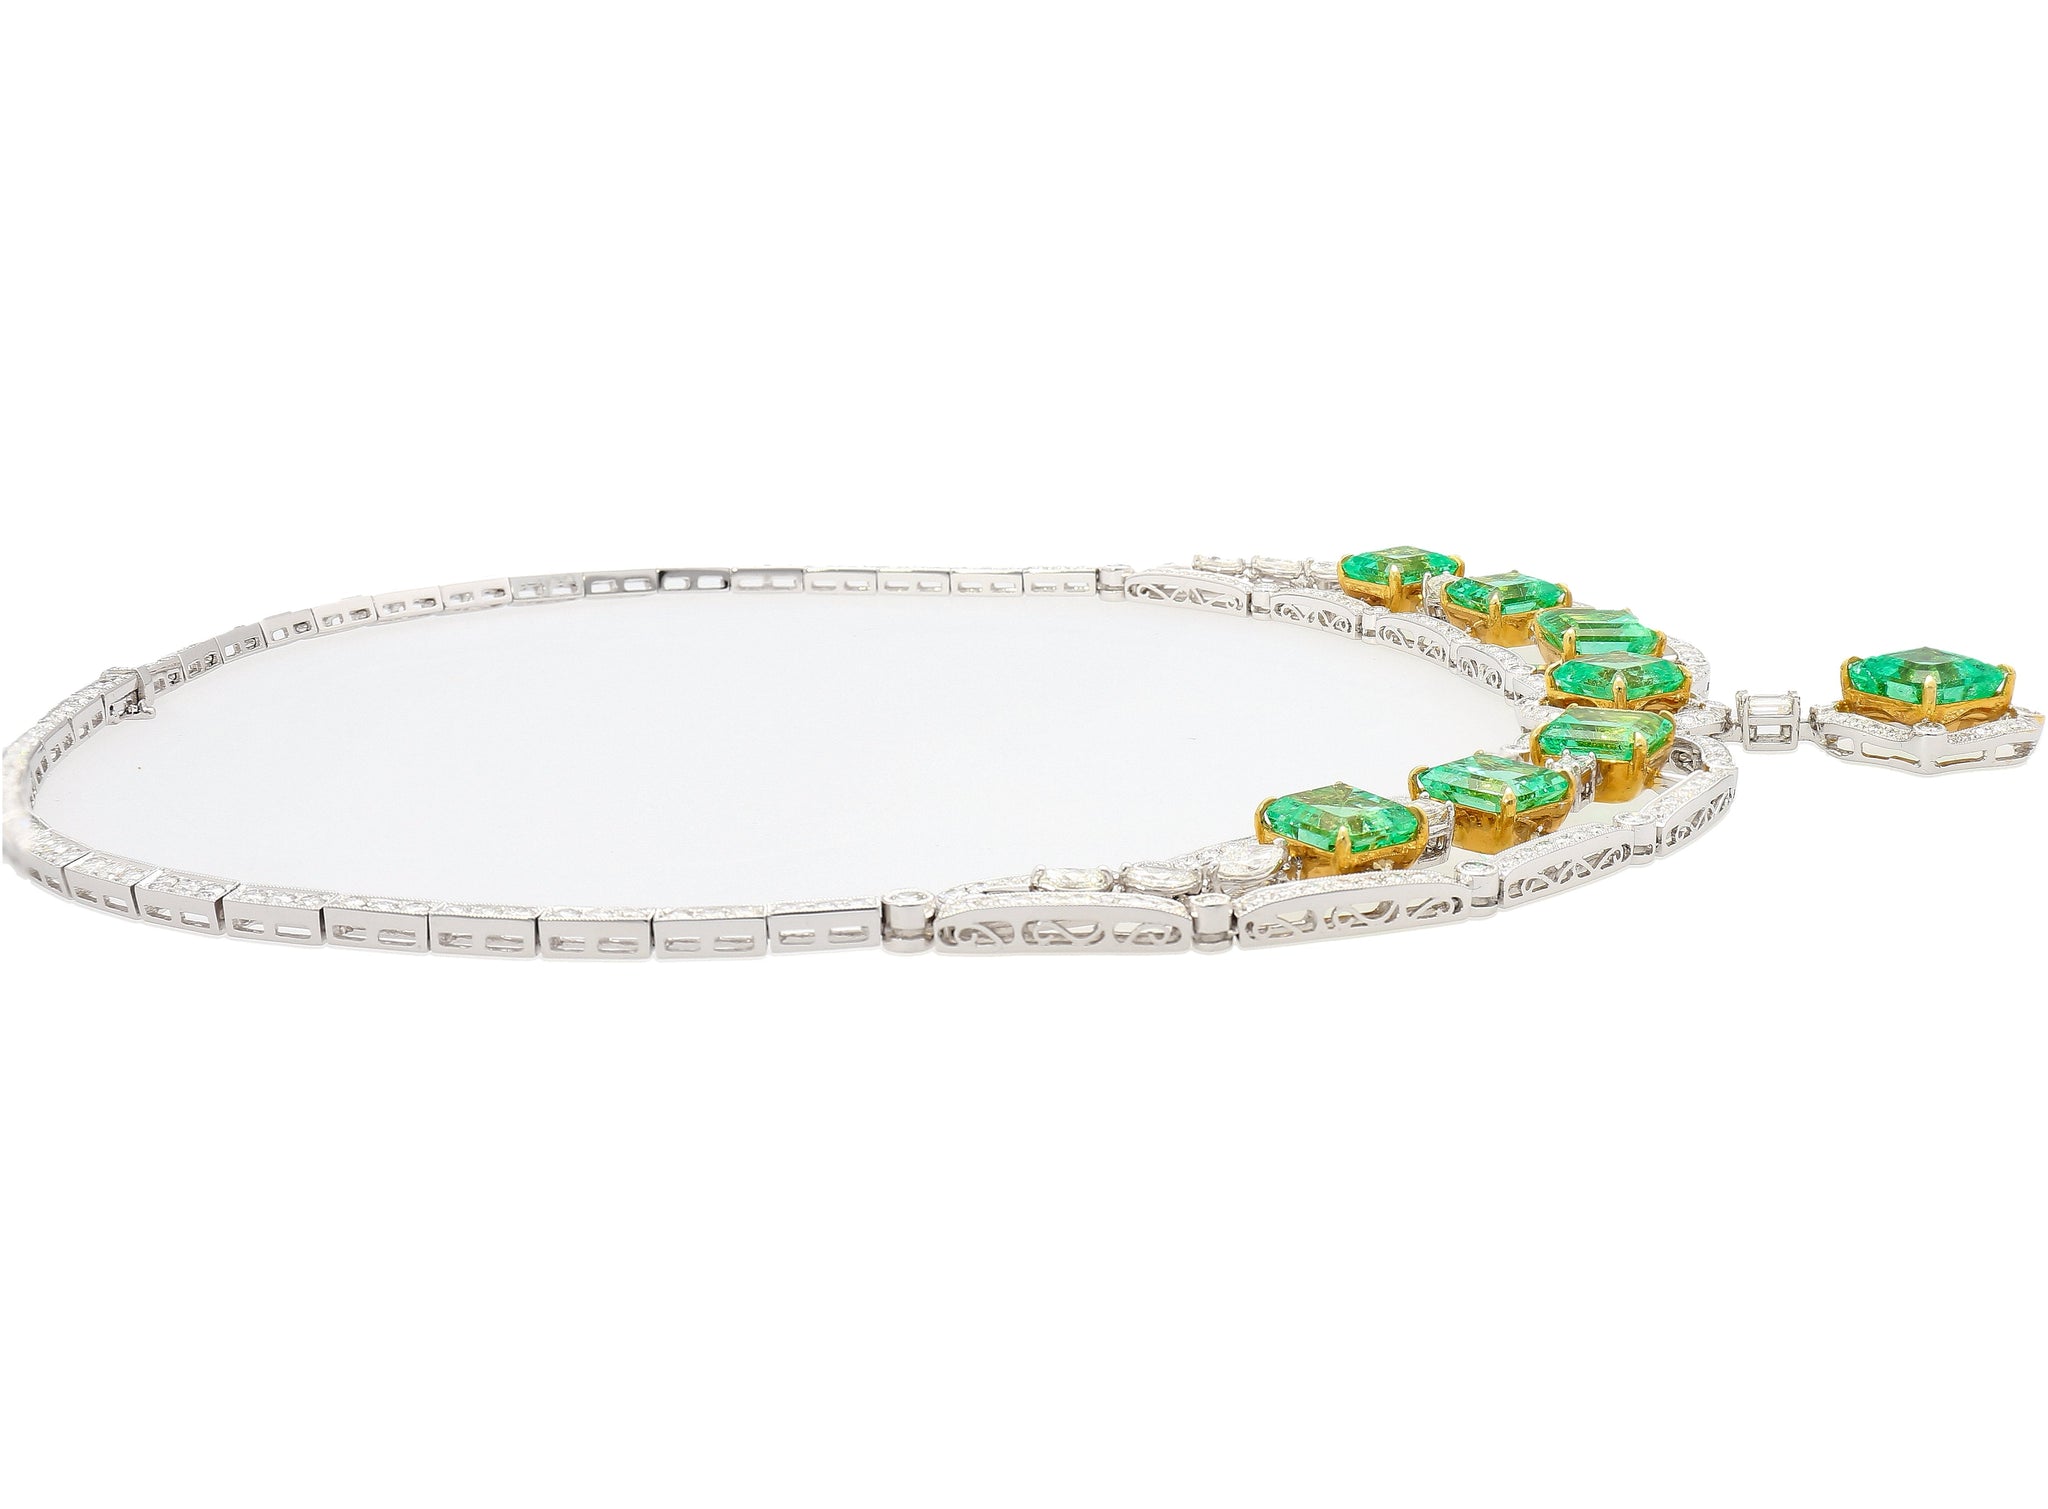 GIA Certified 6.21 Carat Emerald and 30.38 Carat Emerald With 9.86 Carat Diamonds Chandelier Necklace